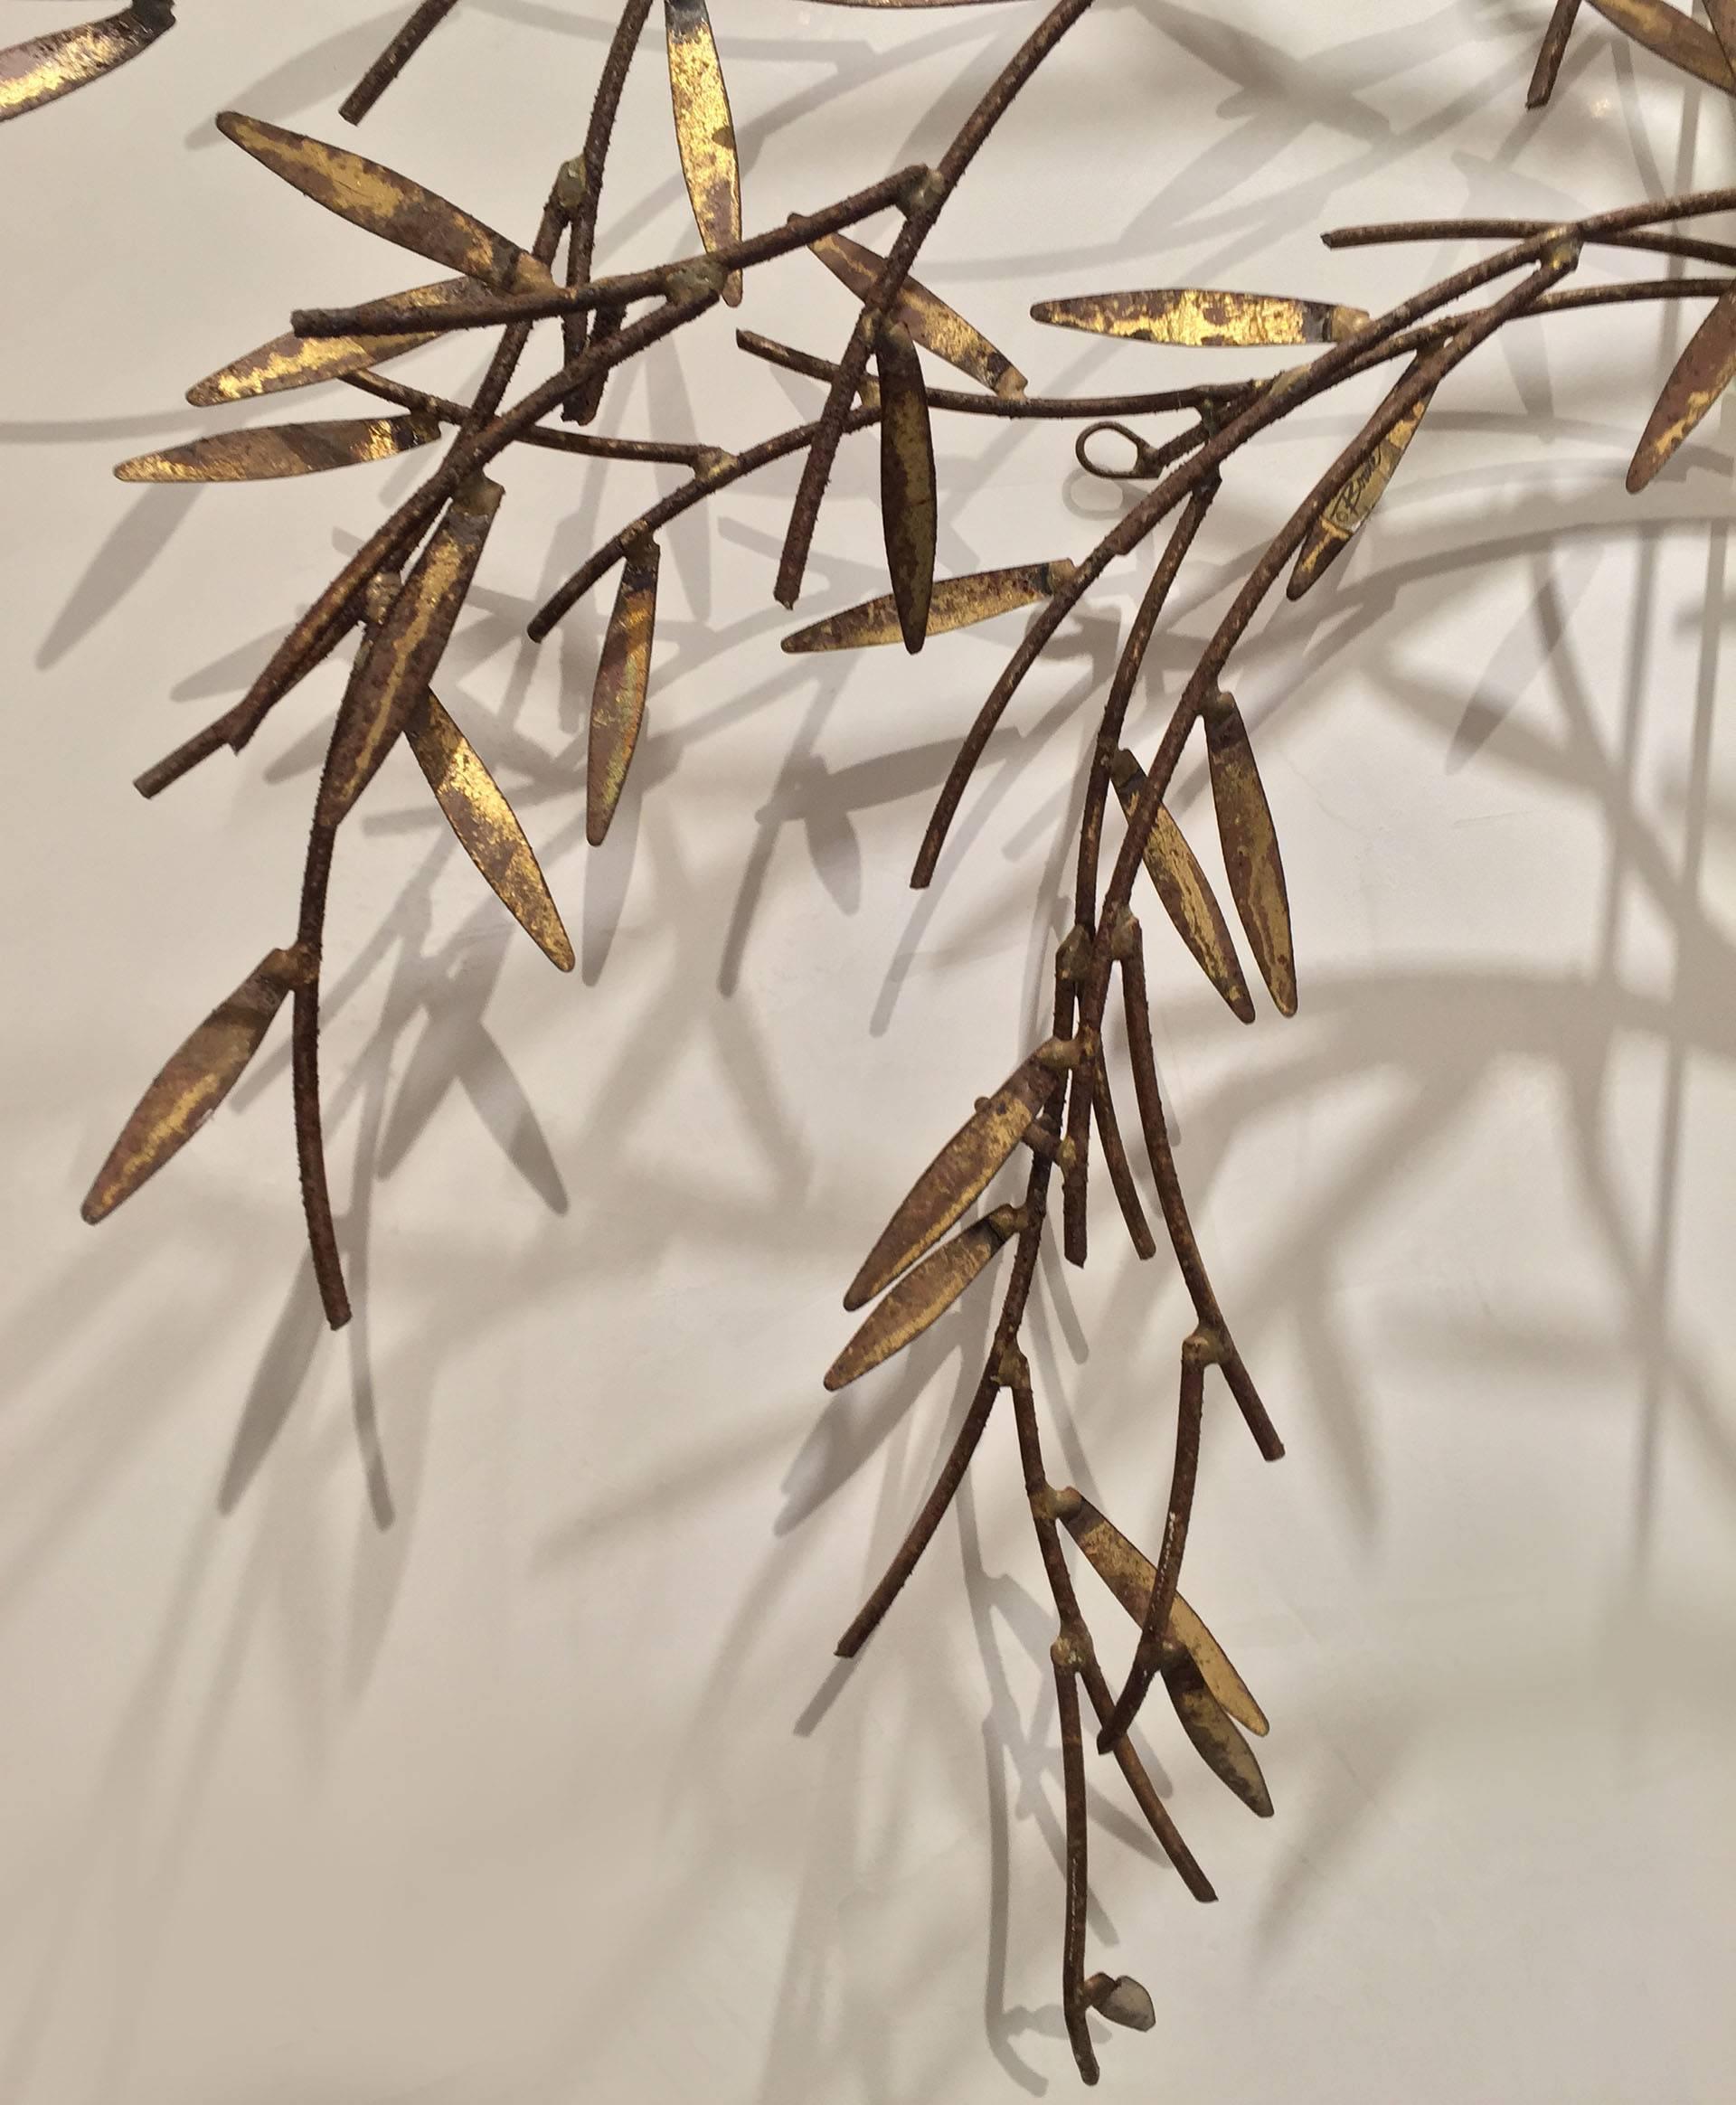 American Post-War design gilt metal wall sculpture of a willow tree signed by William Bowie, circa 1970s.